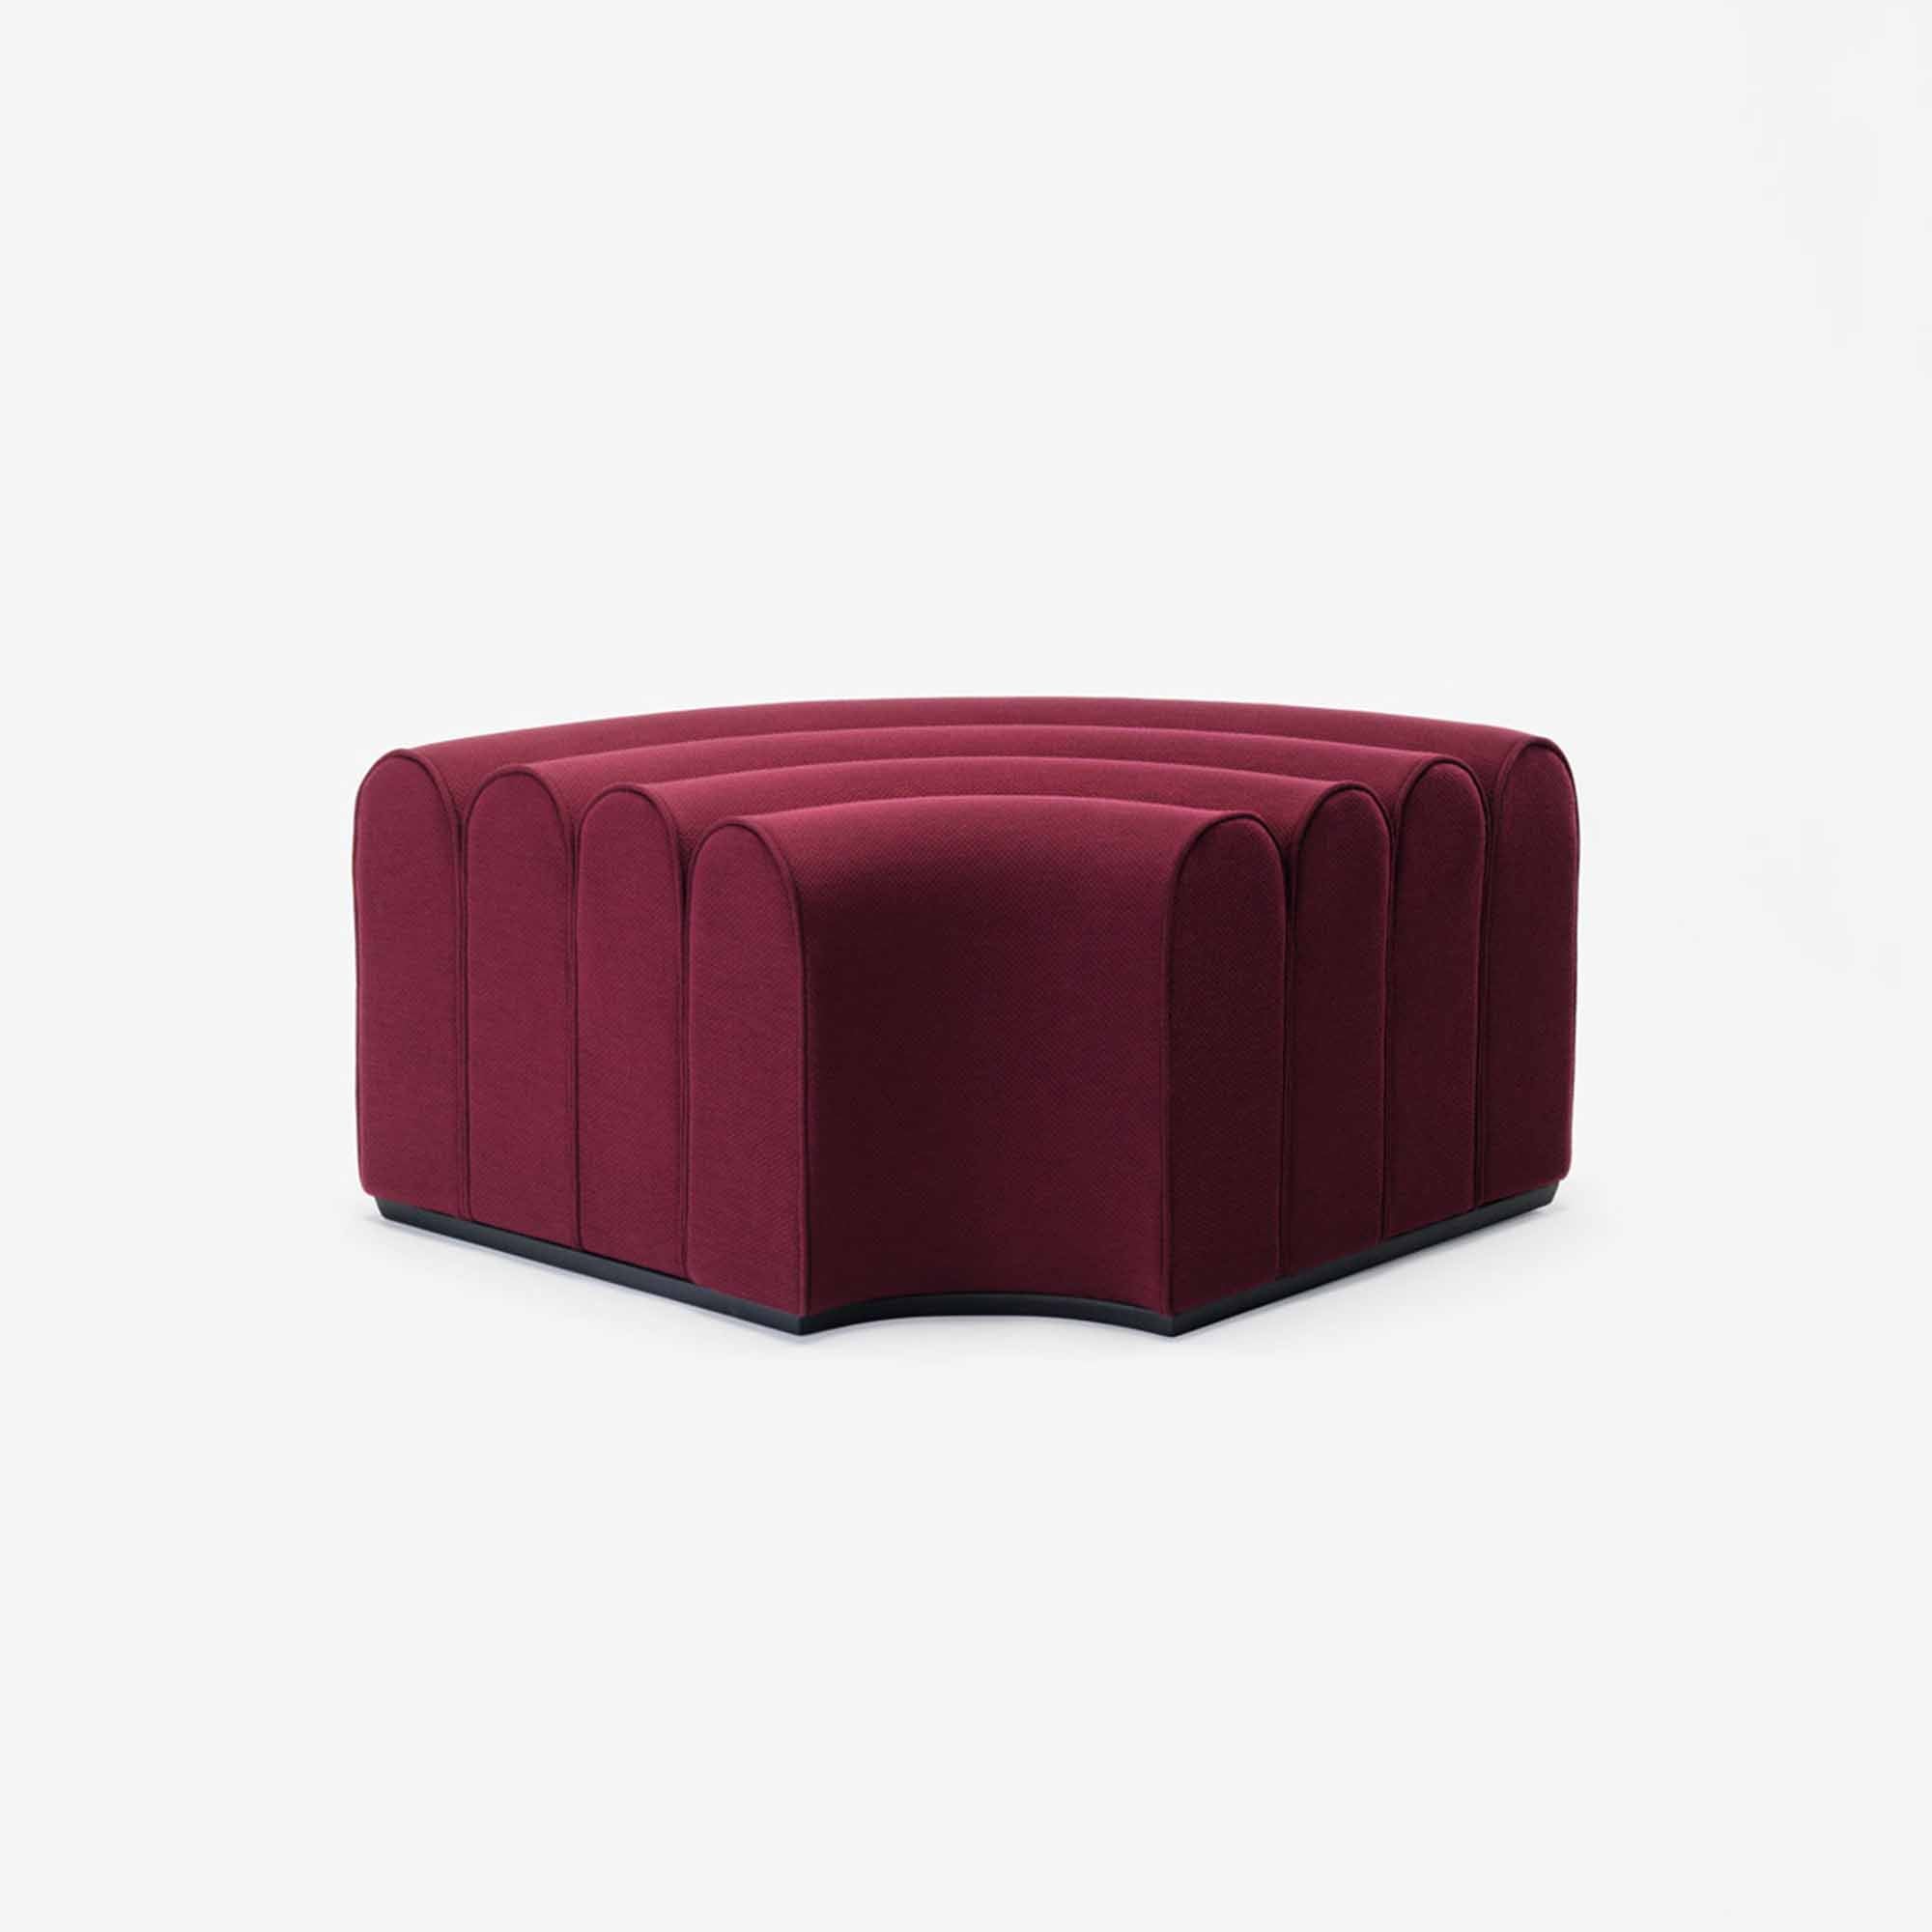 ARKAD Corner Pouffe Cherry Large front view